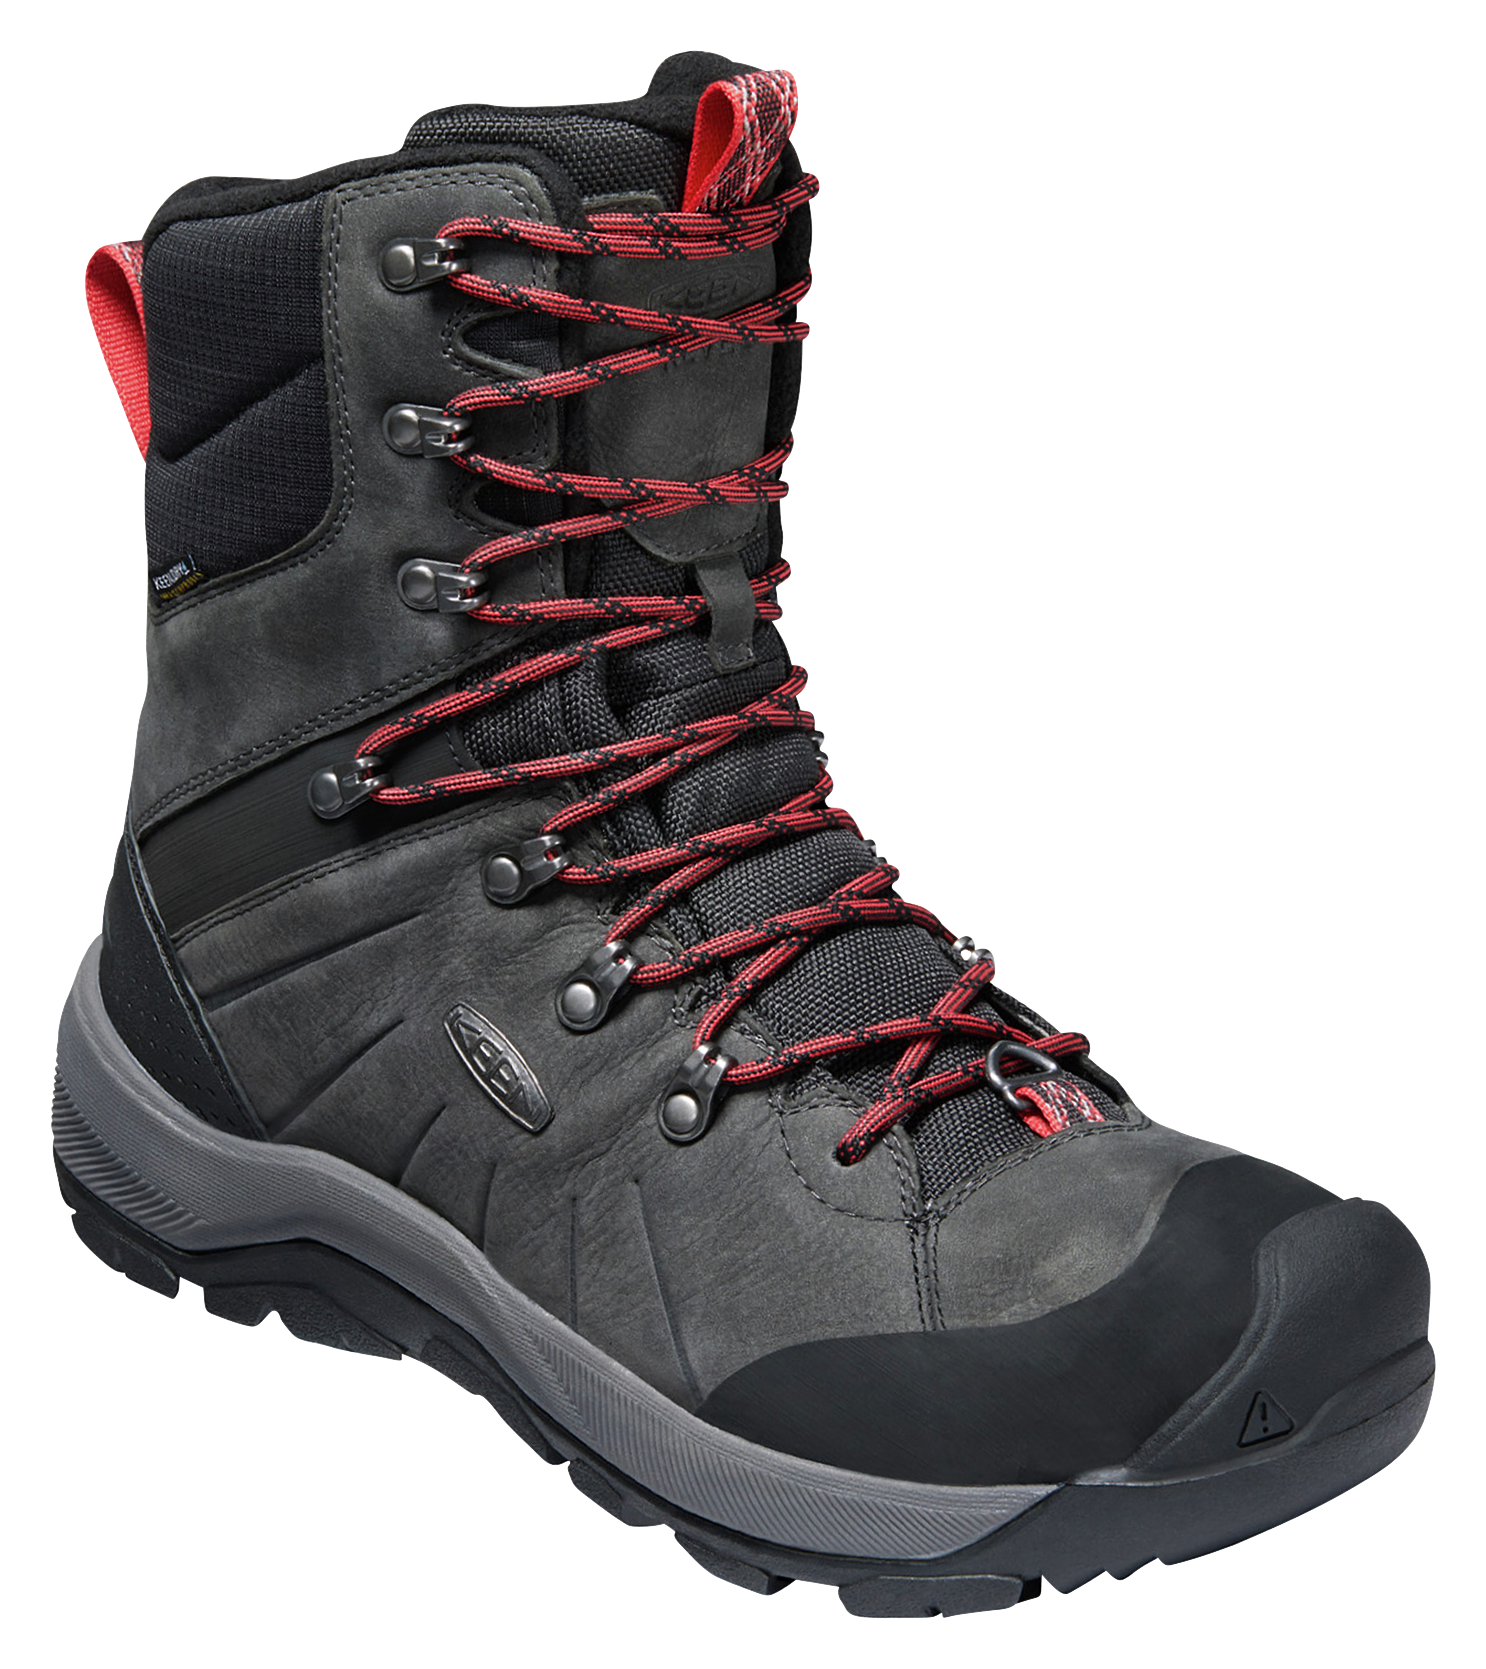 KEEN Revel IV High Polar Insulated Waterproof Hiking Boots for Men